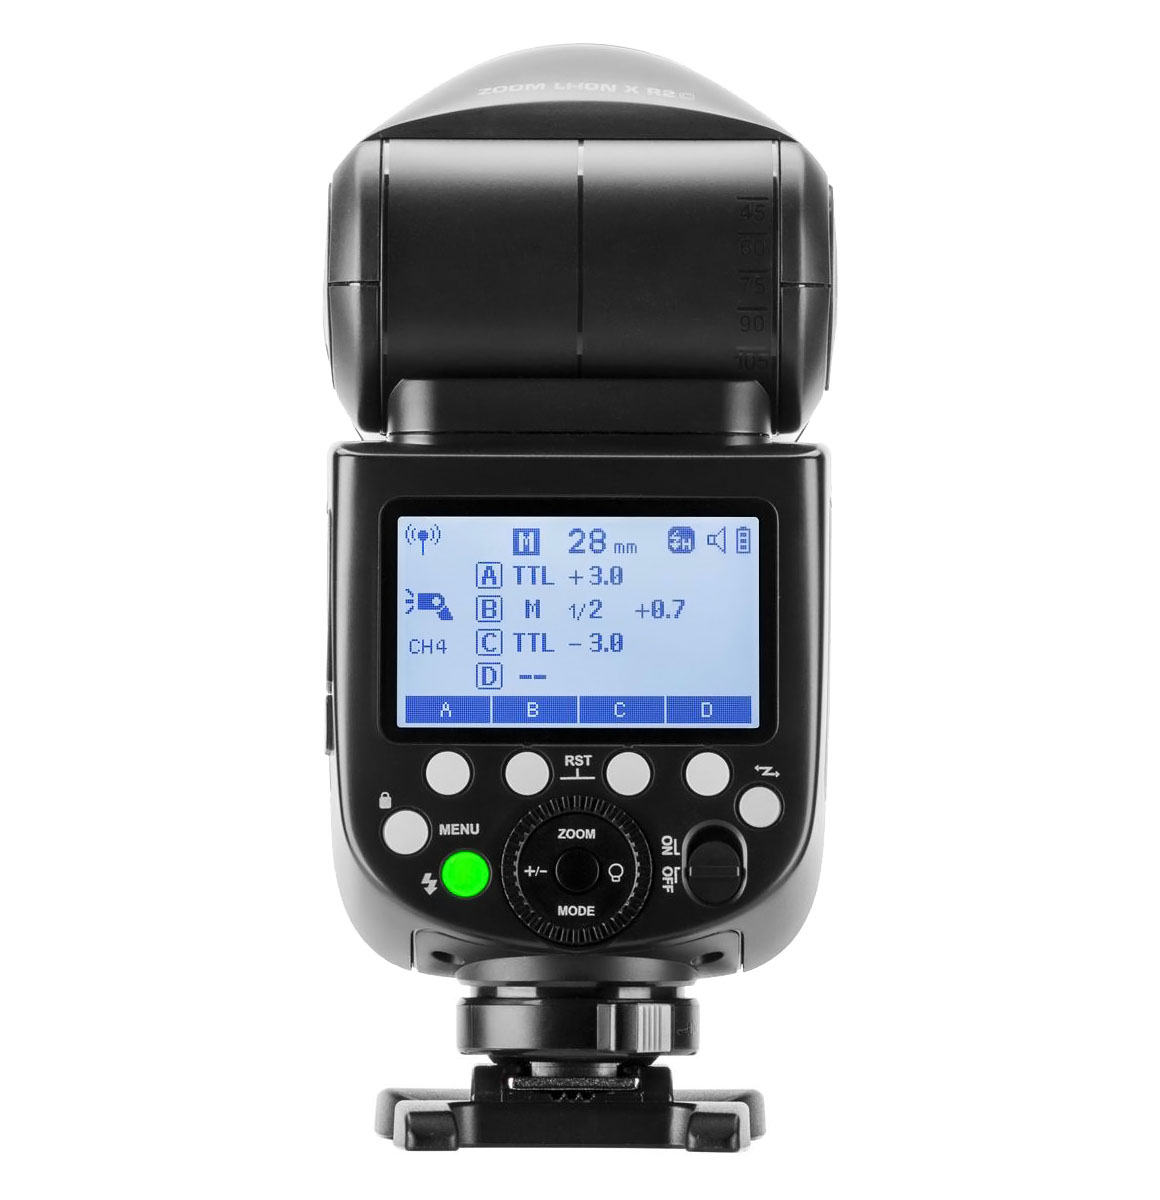 The Godox V1 Pro is 2 flashes in one